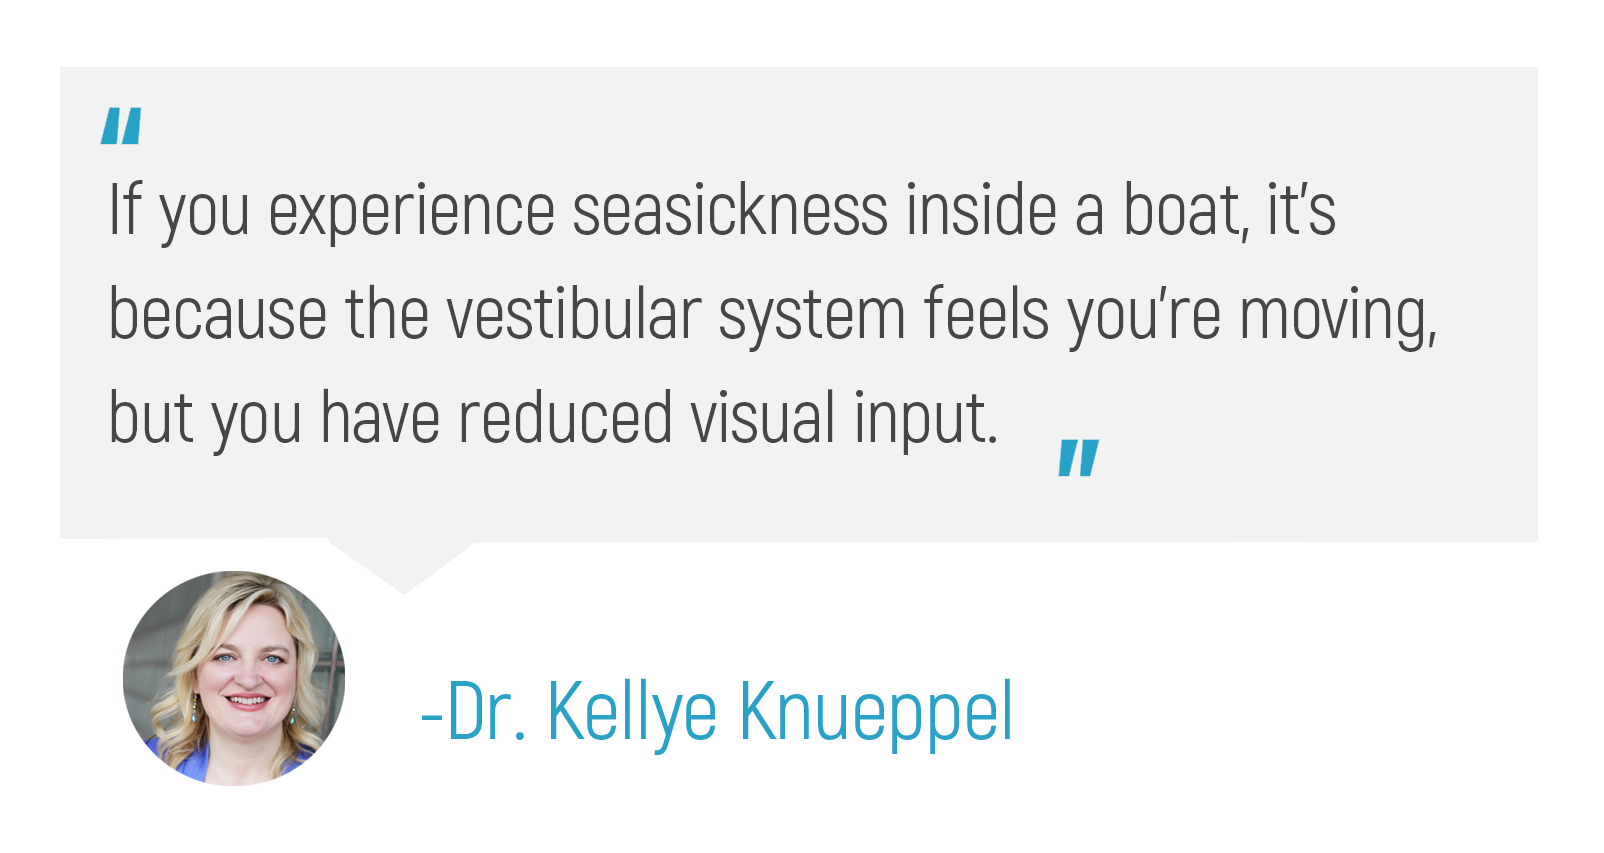 "If you experience seasickness inside a boat, it's because the vestibular system feels you're moving, but you have reduced visual input."